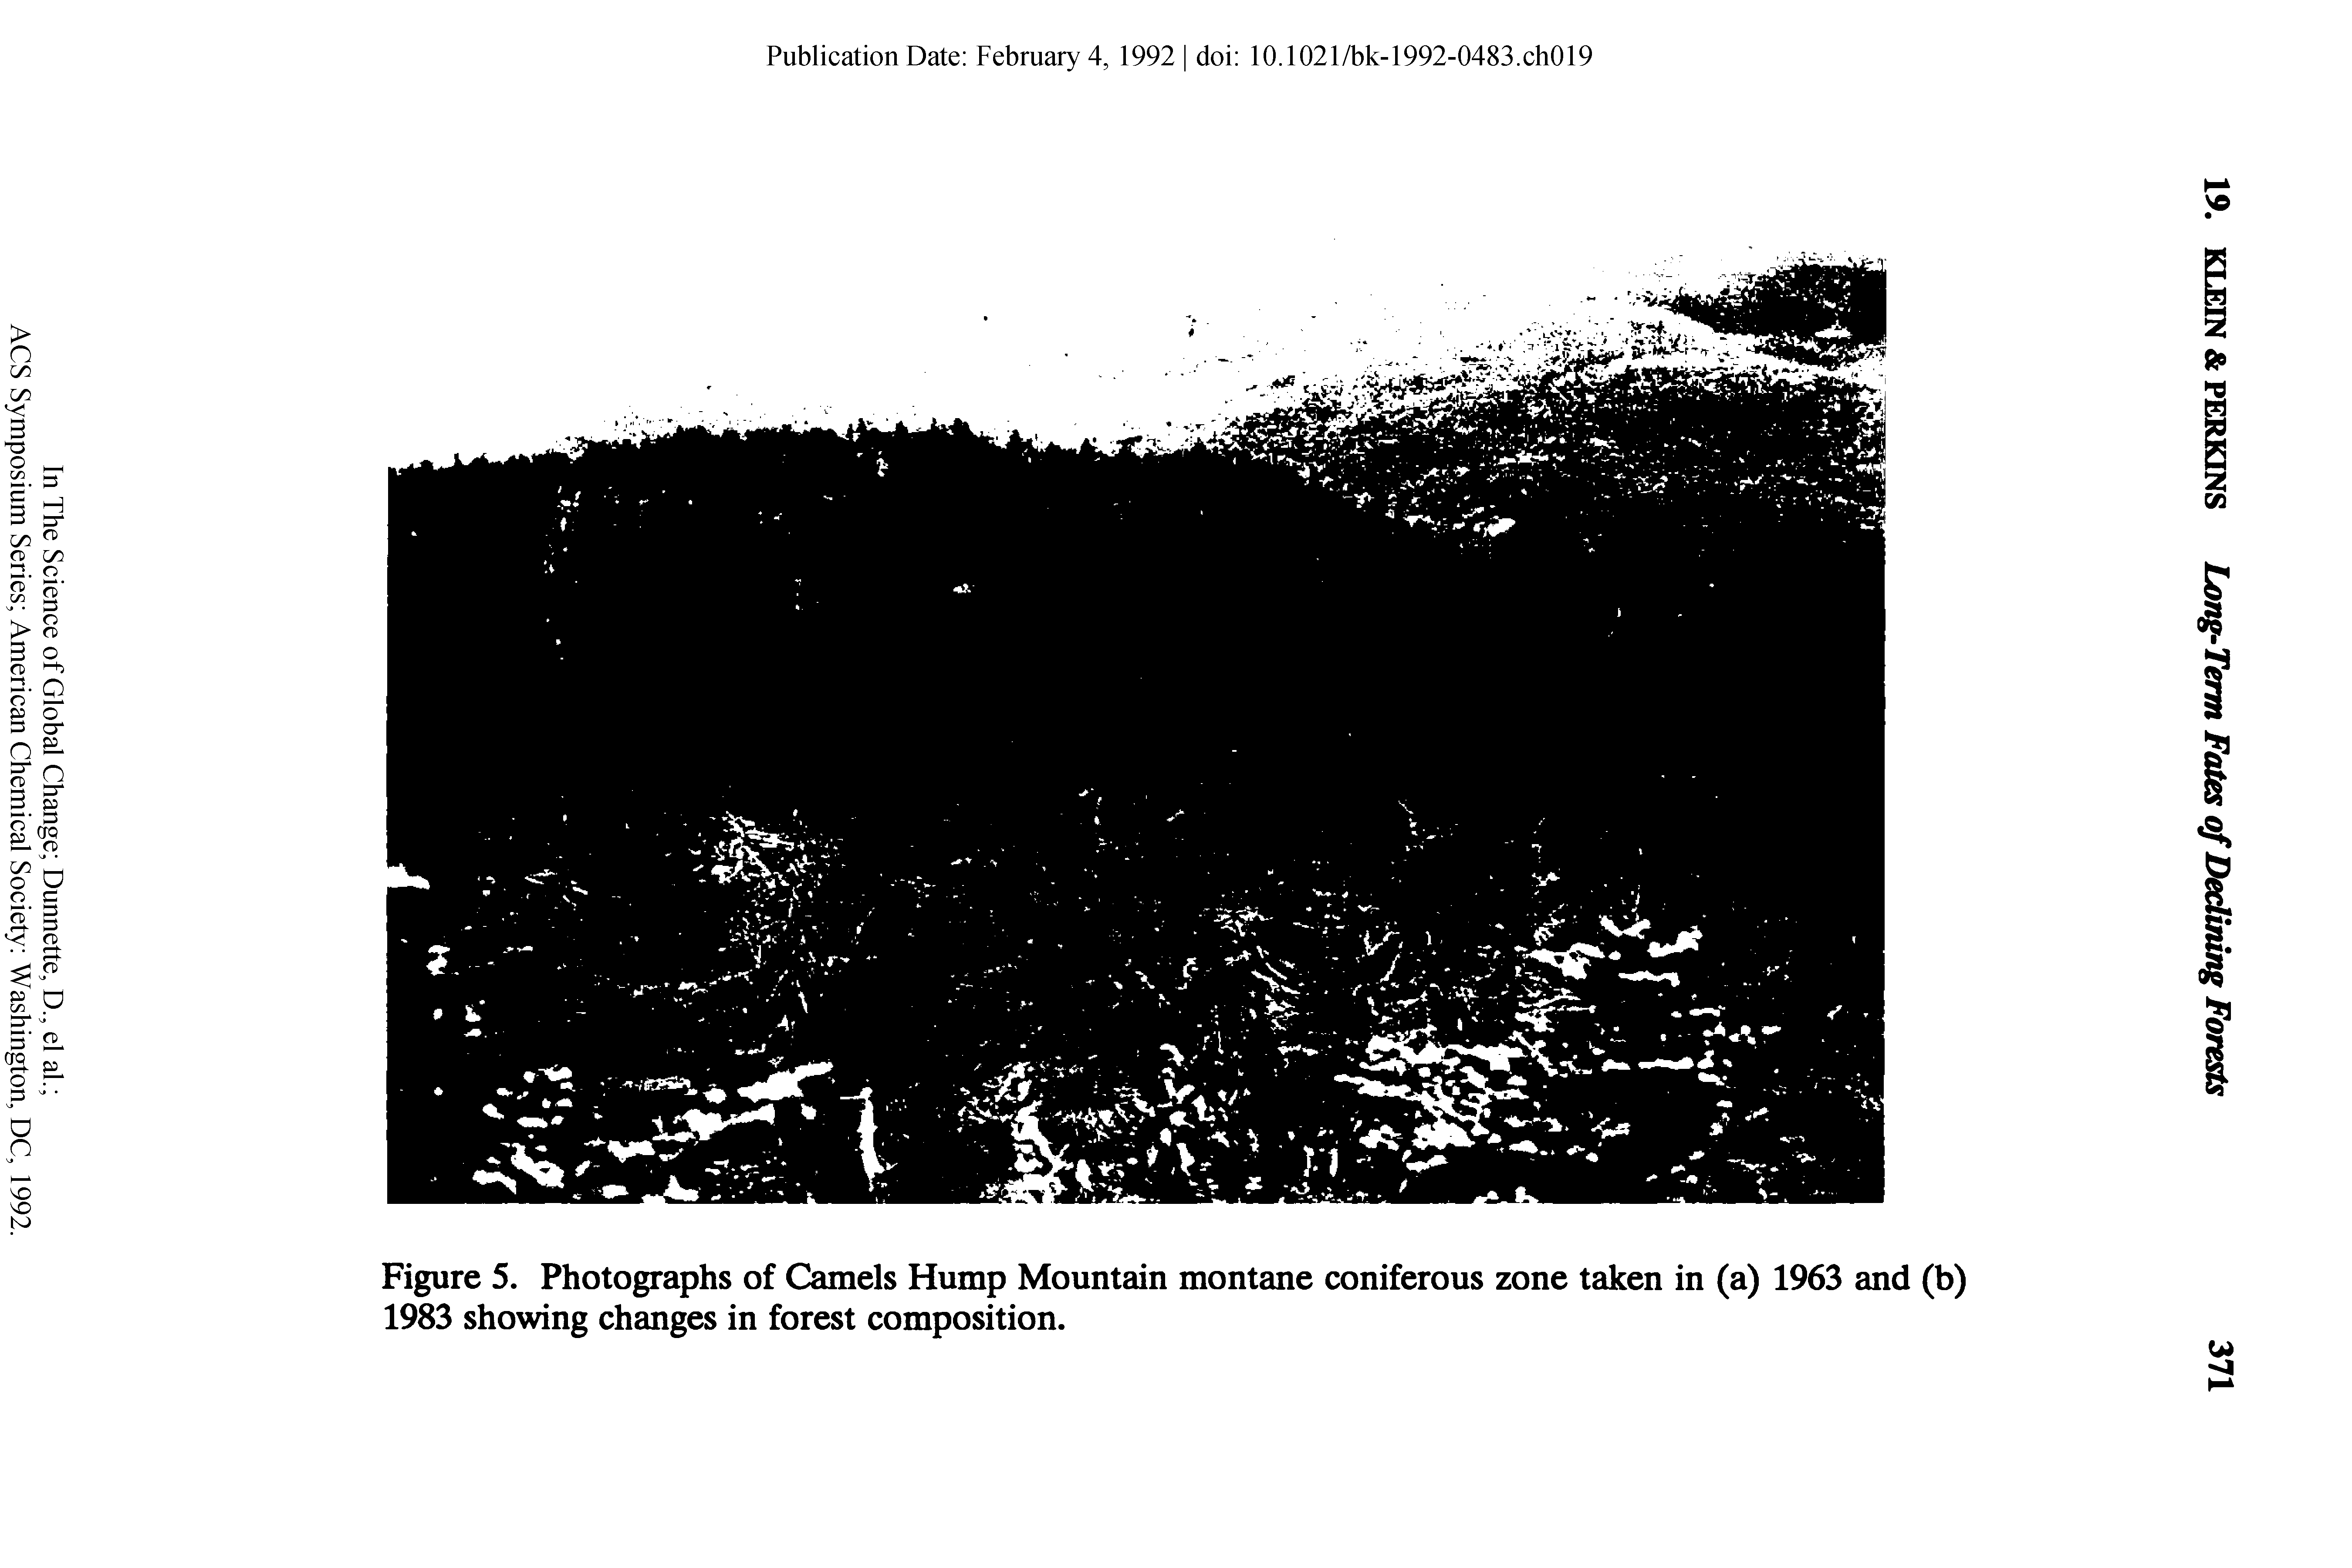 Figure 5. Photographs of Camels Hump Mountain montane coniferous zone taken in (a) 1963 and (b) 1983 showing changes in forest composition.